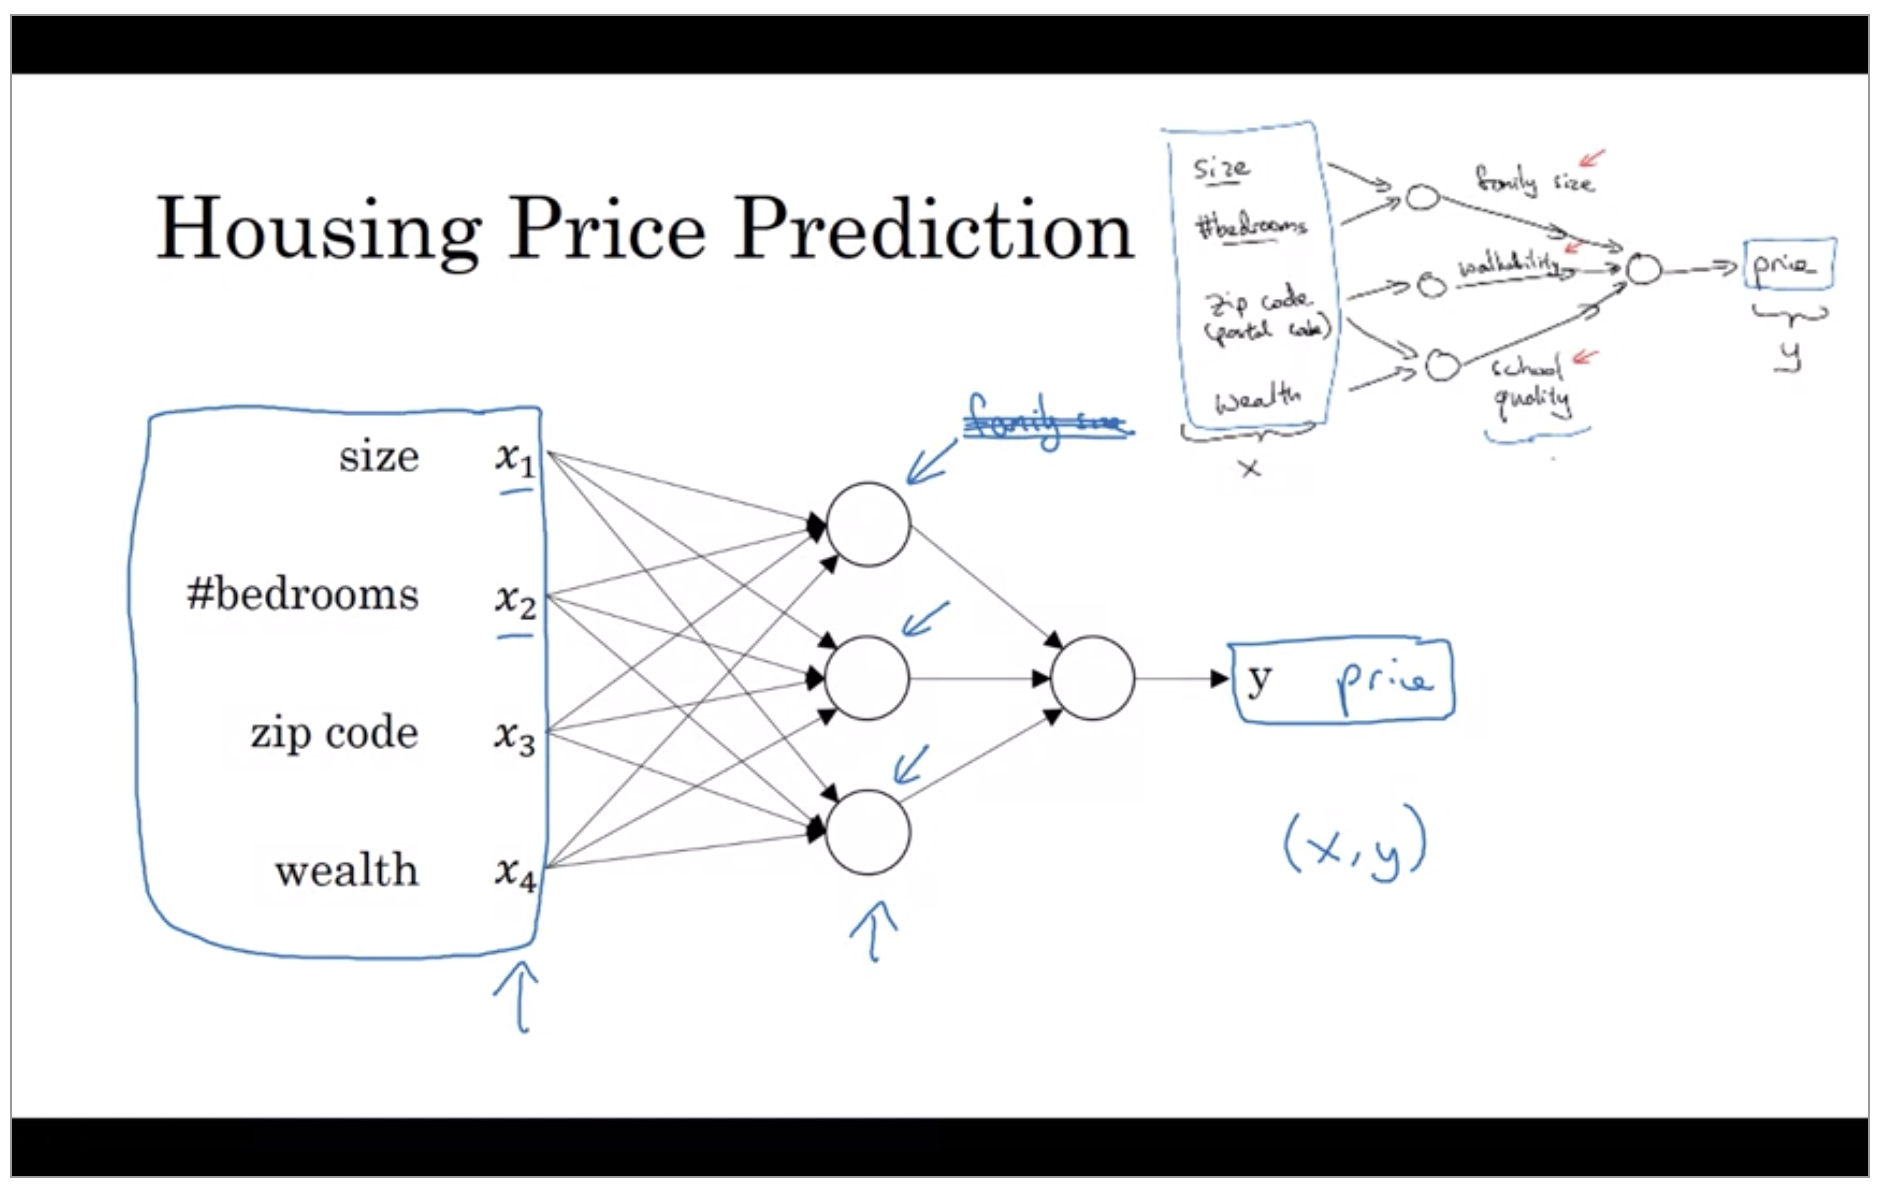 housing-price-prediction-3.png